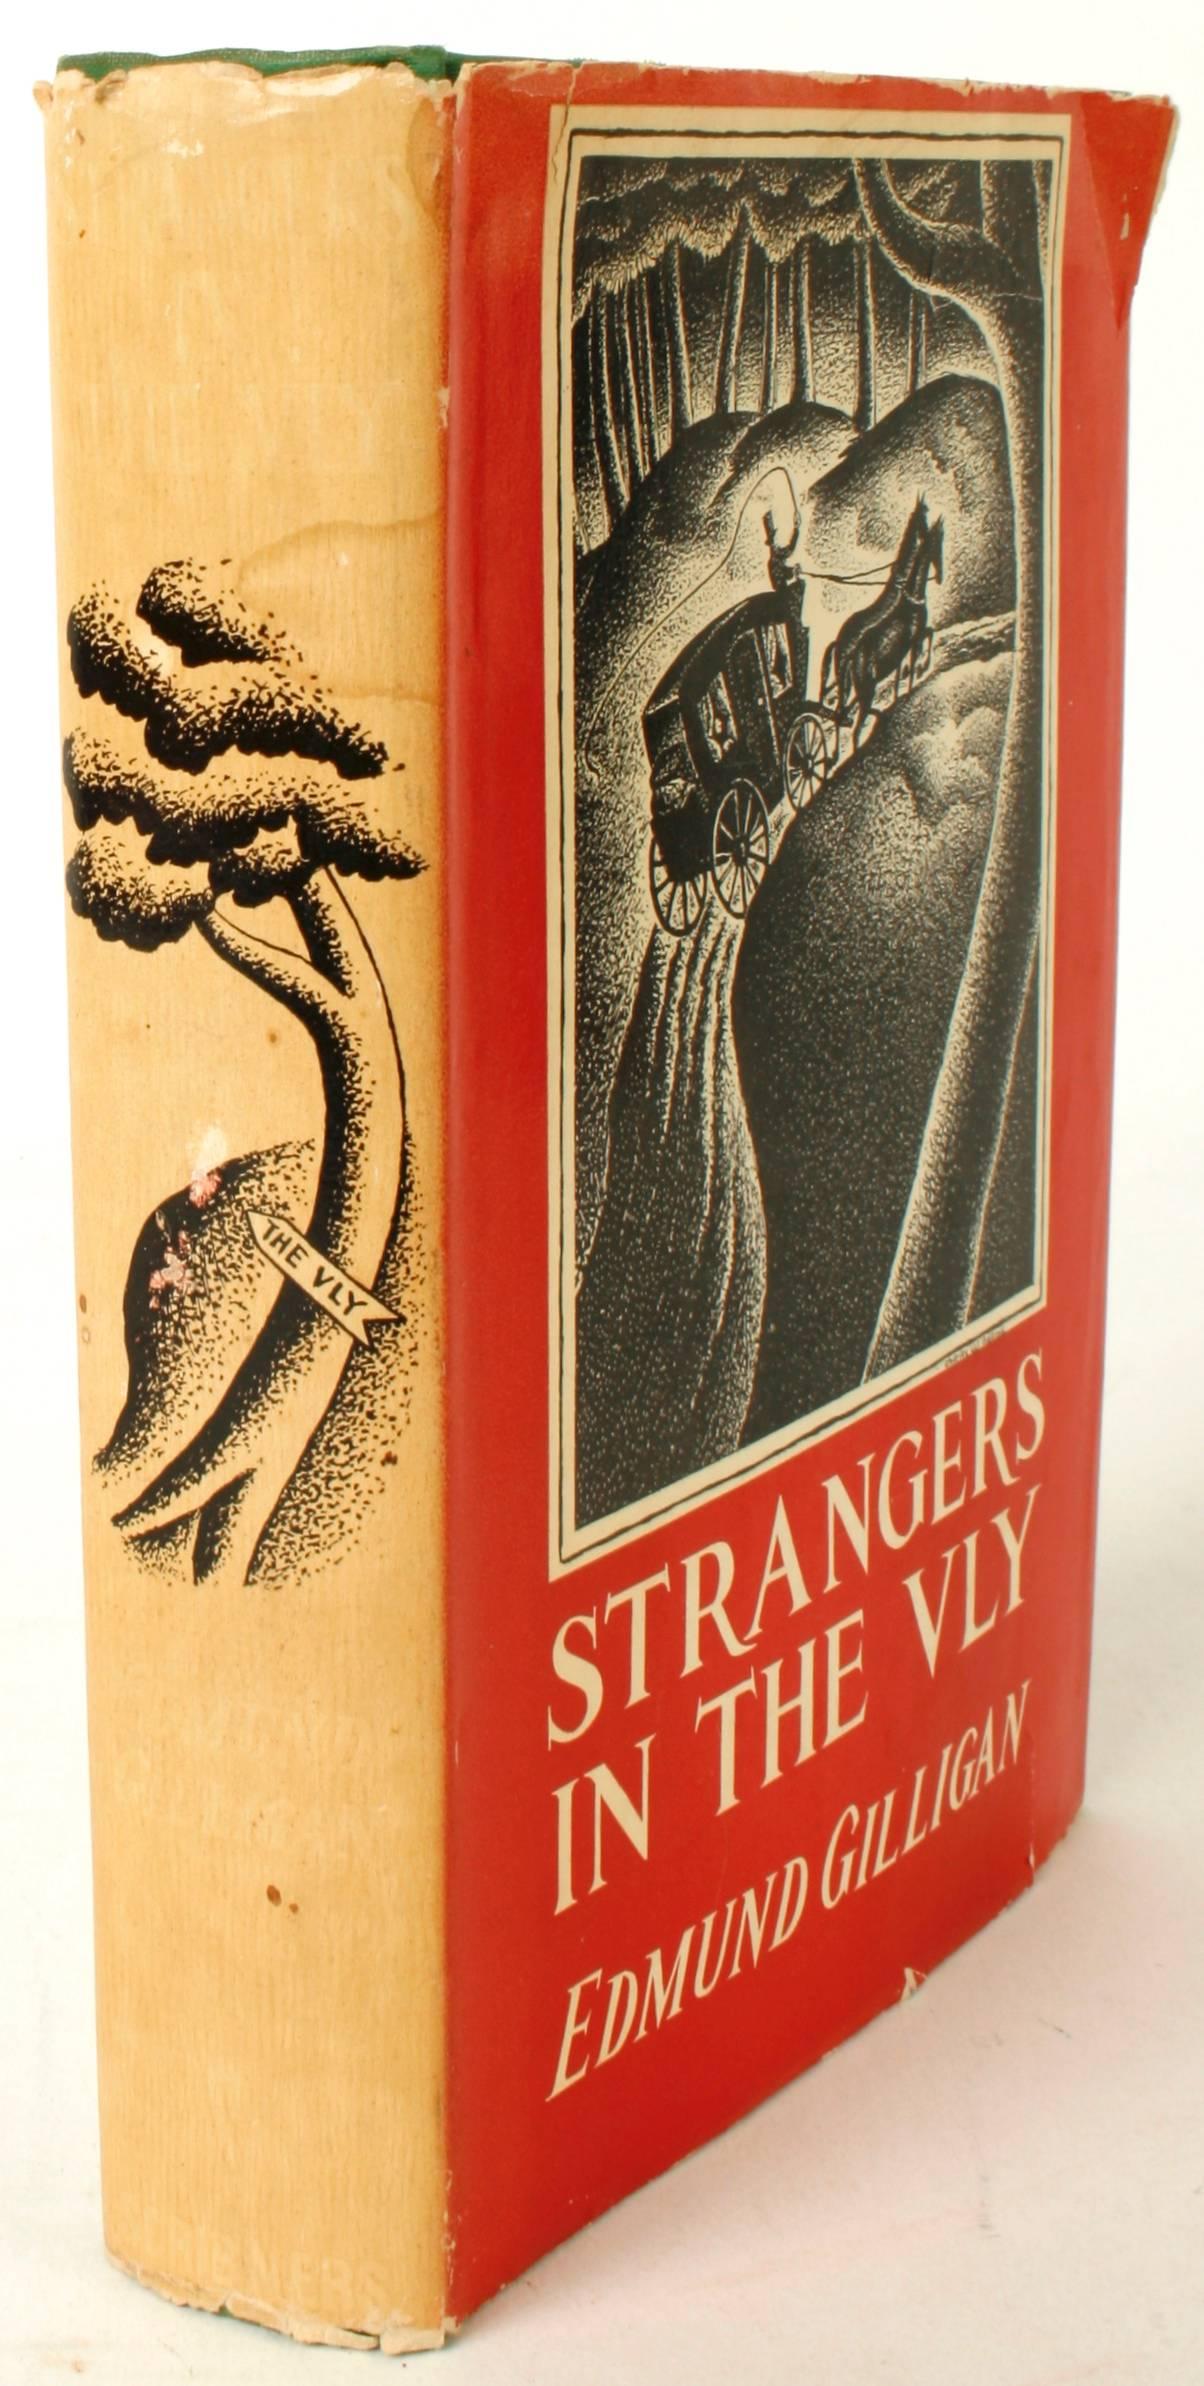 Strangers in the Vly by Edmund Gilligan. NY: Charles Scribner's Sons, 1941. First edition hardcover with dust jacket. 261 pp. A horror novel set in New York's Catskill mountains where Captain John, a great man in New England and Paris, and his